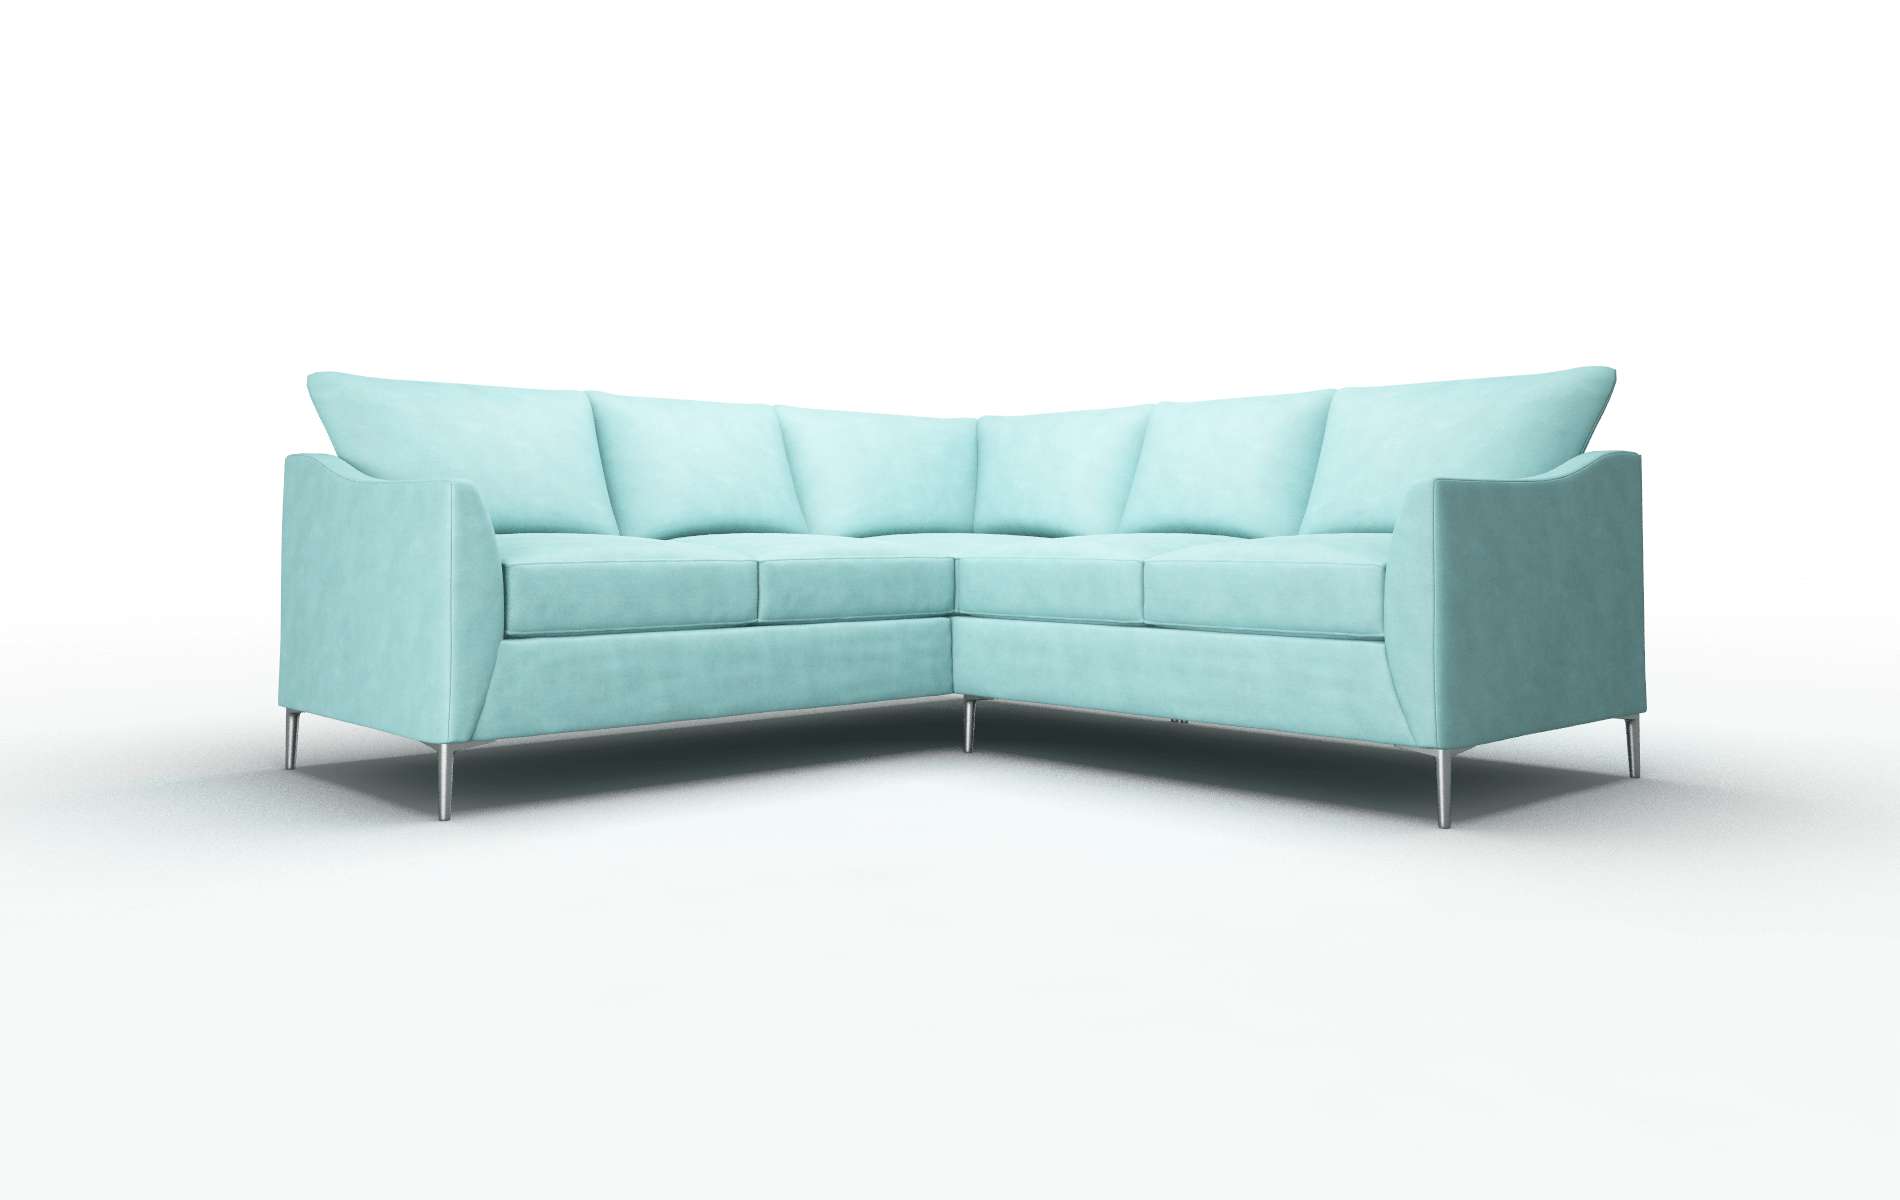 Hamburg Curious Turquoise Sectional metal legs